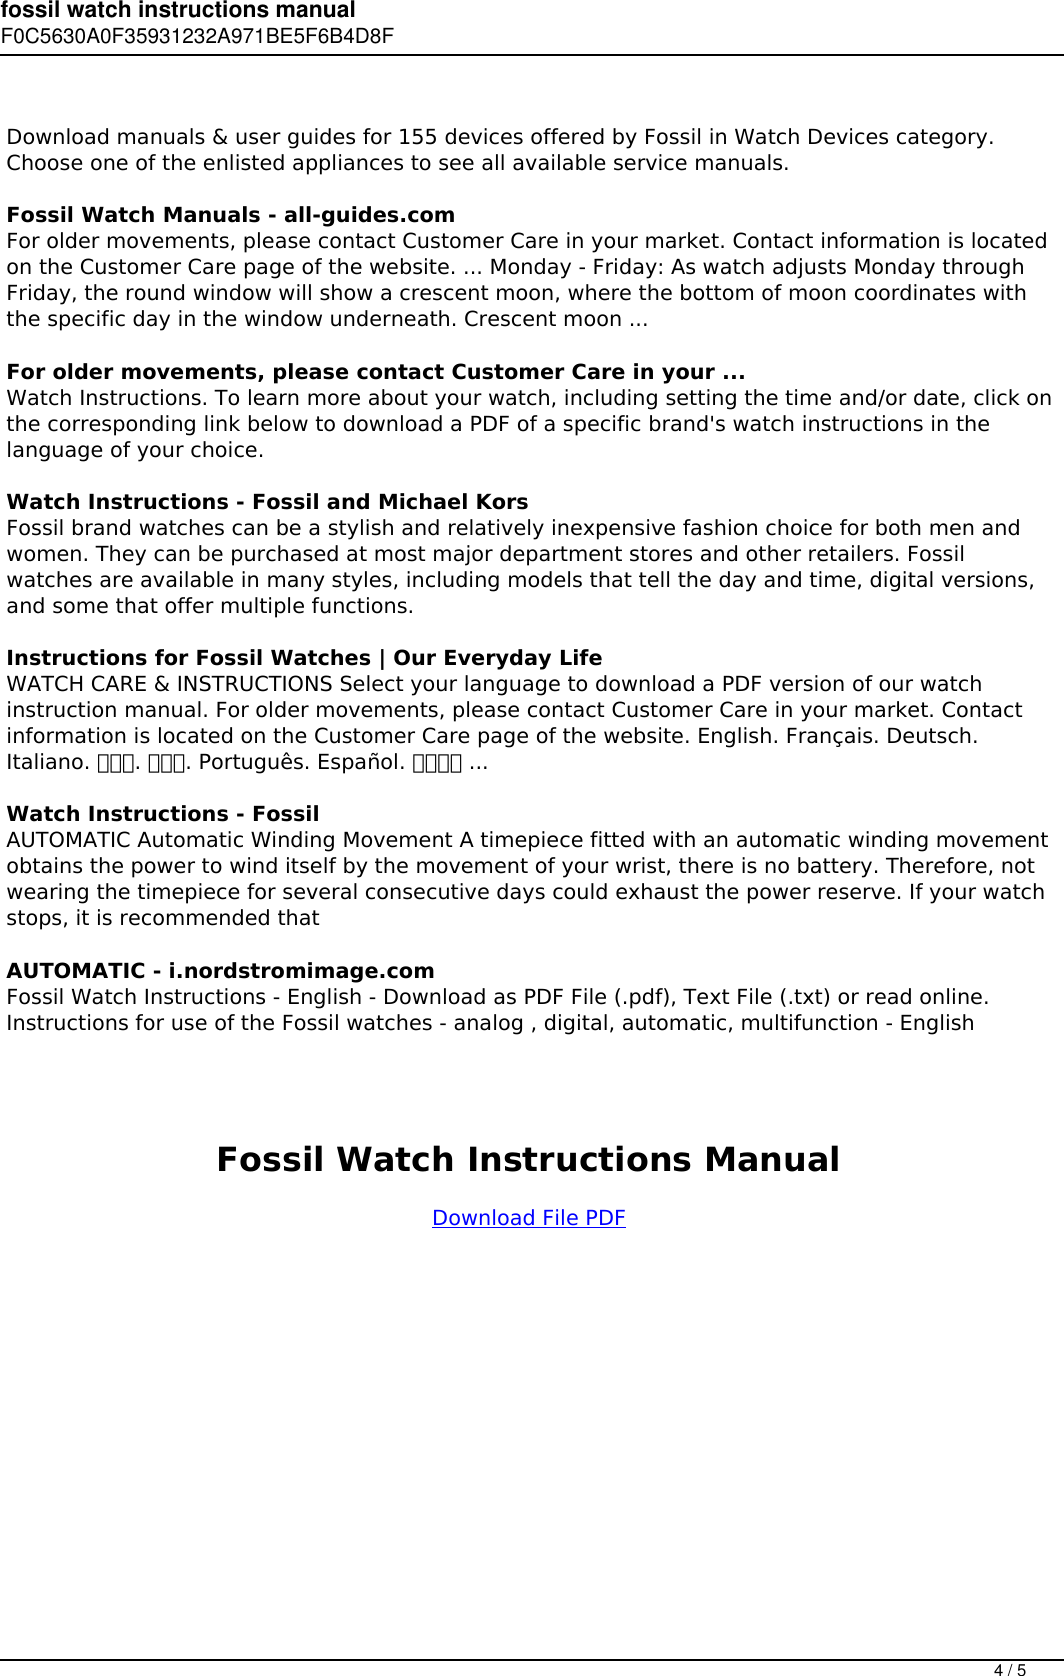 Page 4 of 5 - Fossil Watch Instructions Manual